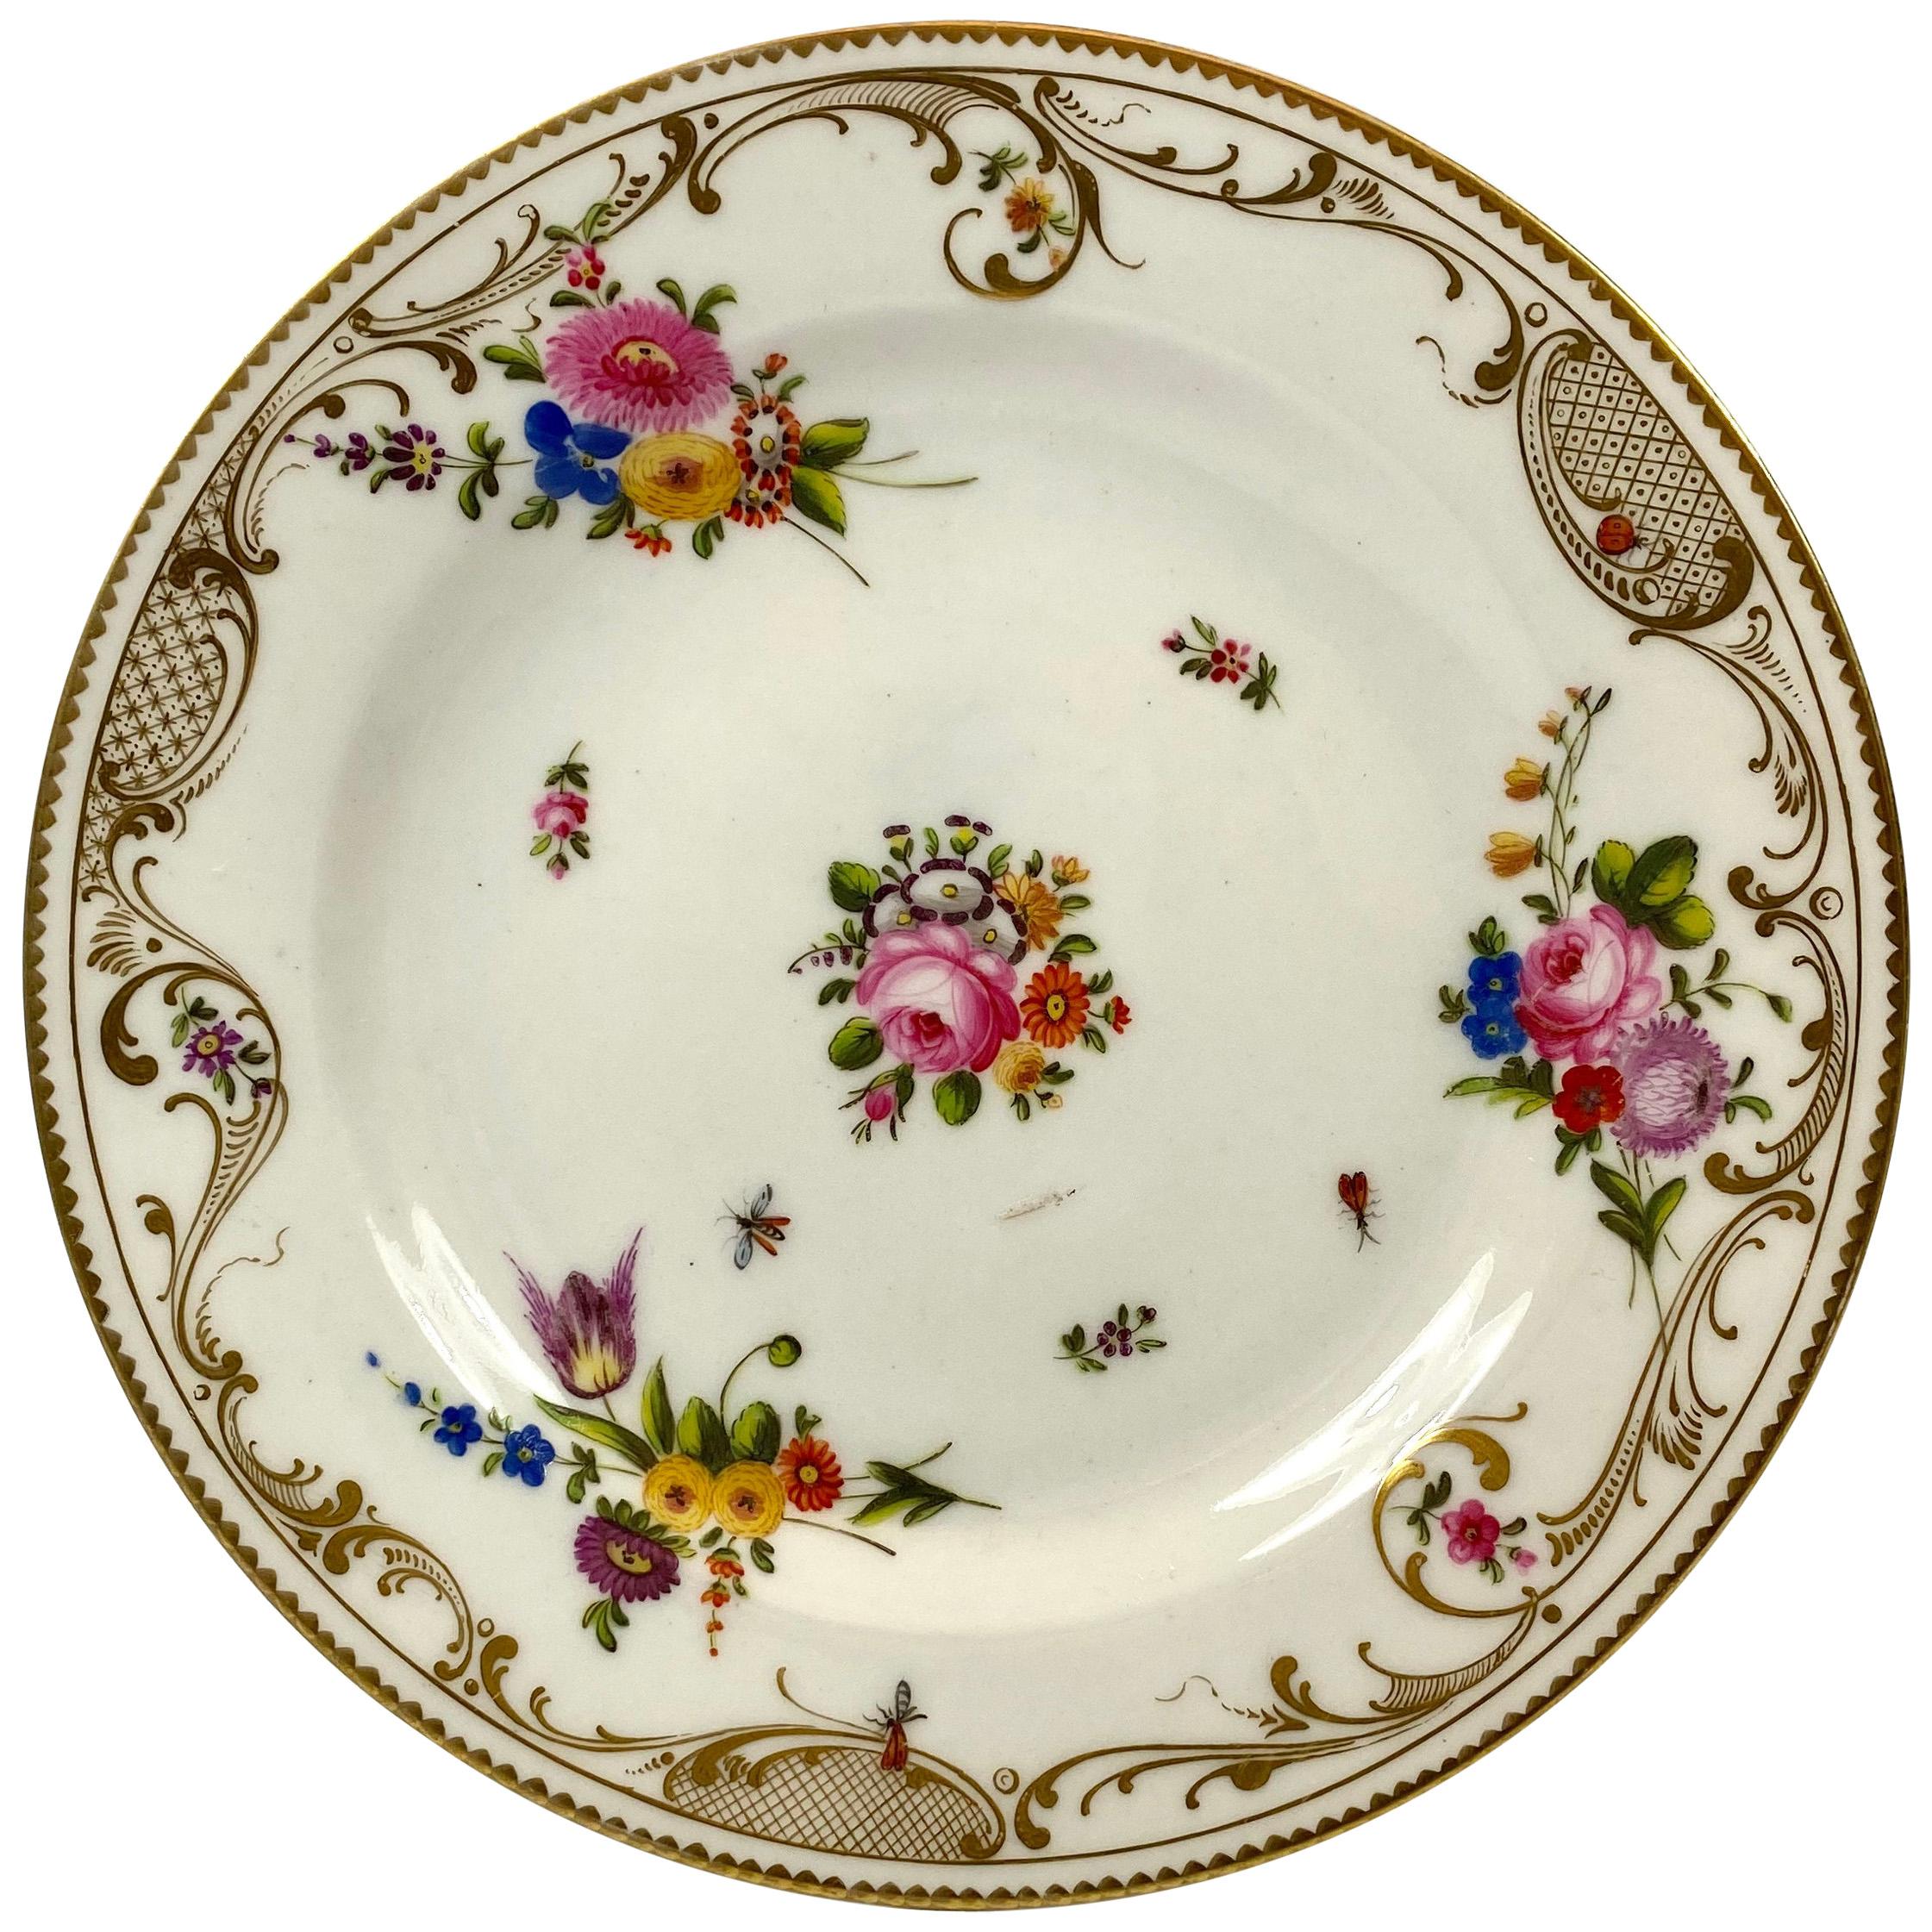 Swansea Porcelain Plate, Flowers and Insects, circa 1815